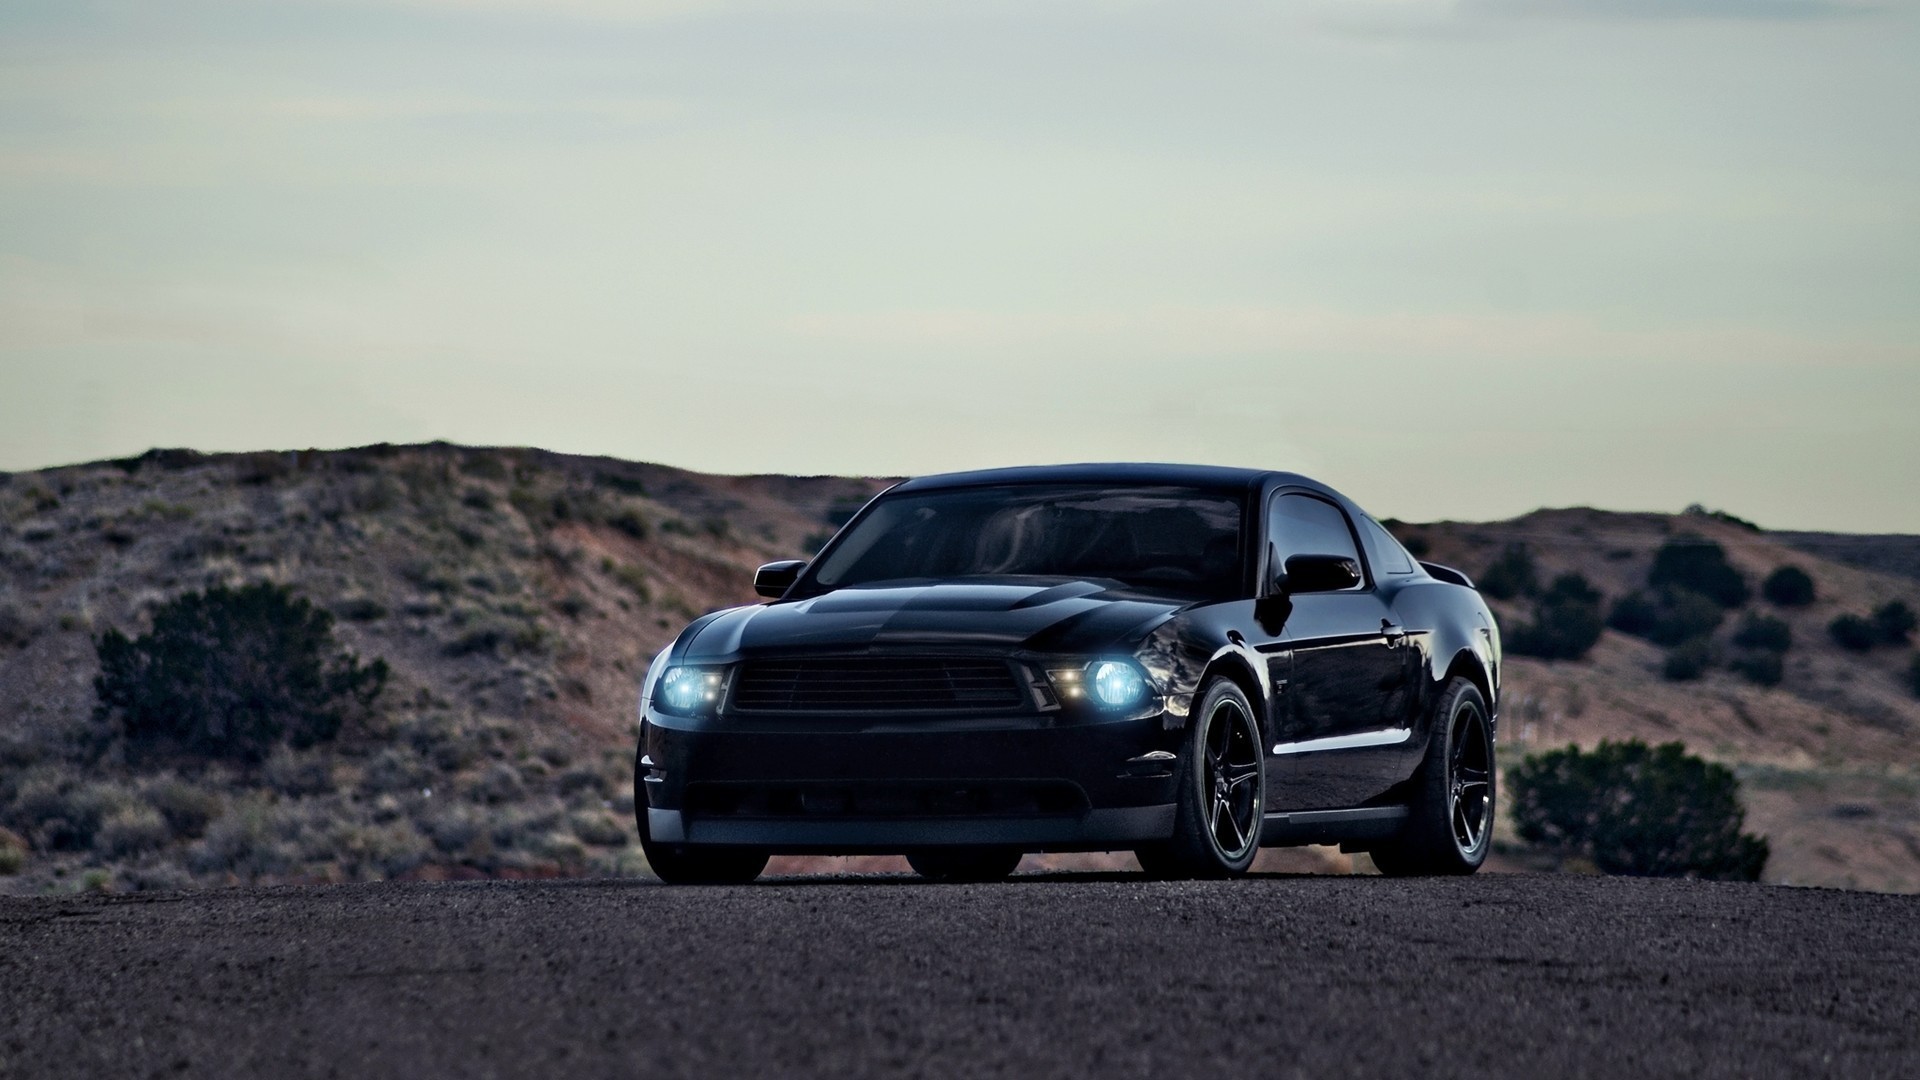 1920x1080 Auto___Ford___Mustang___Ford_Mustang_GT500_black_043497_.jpg